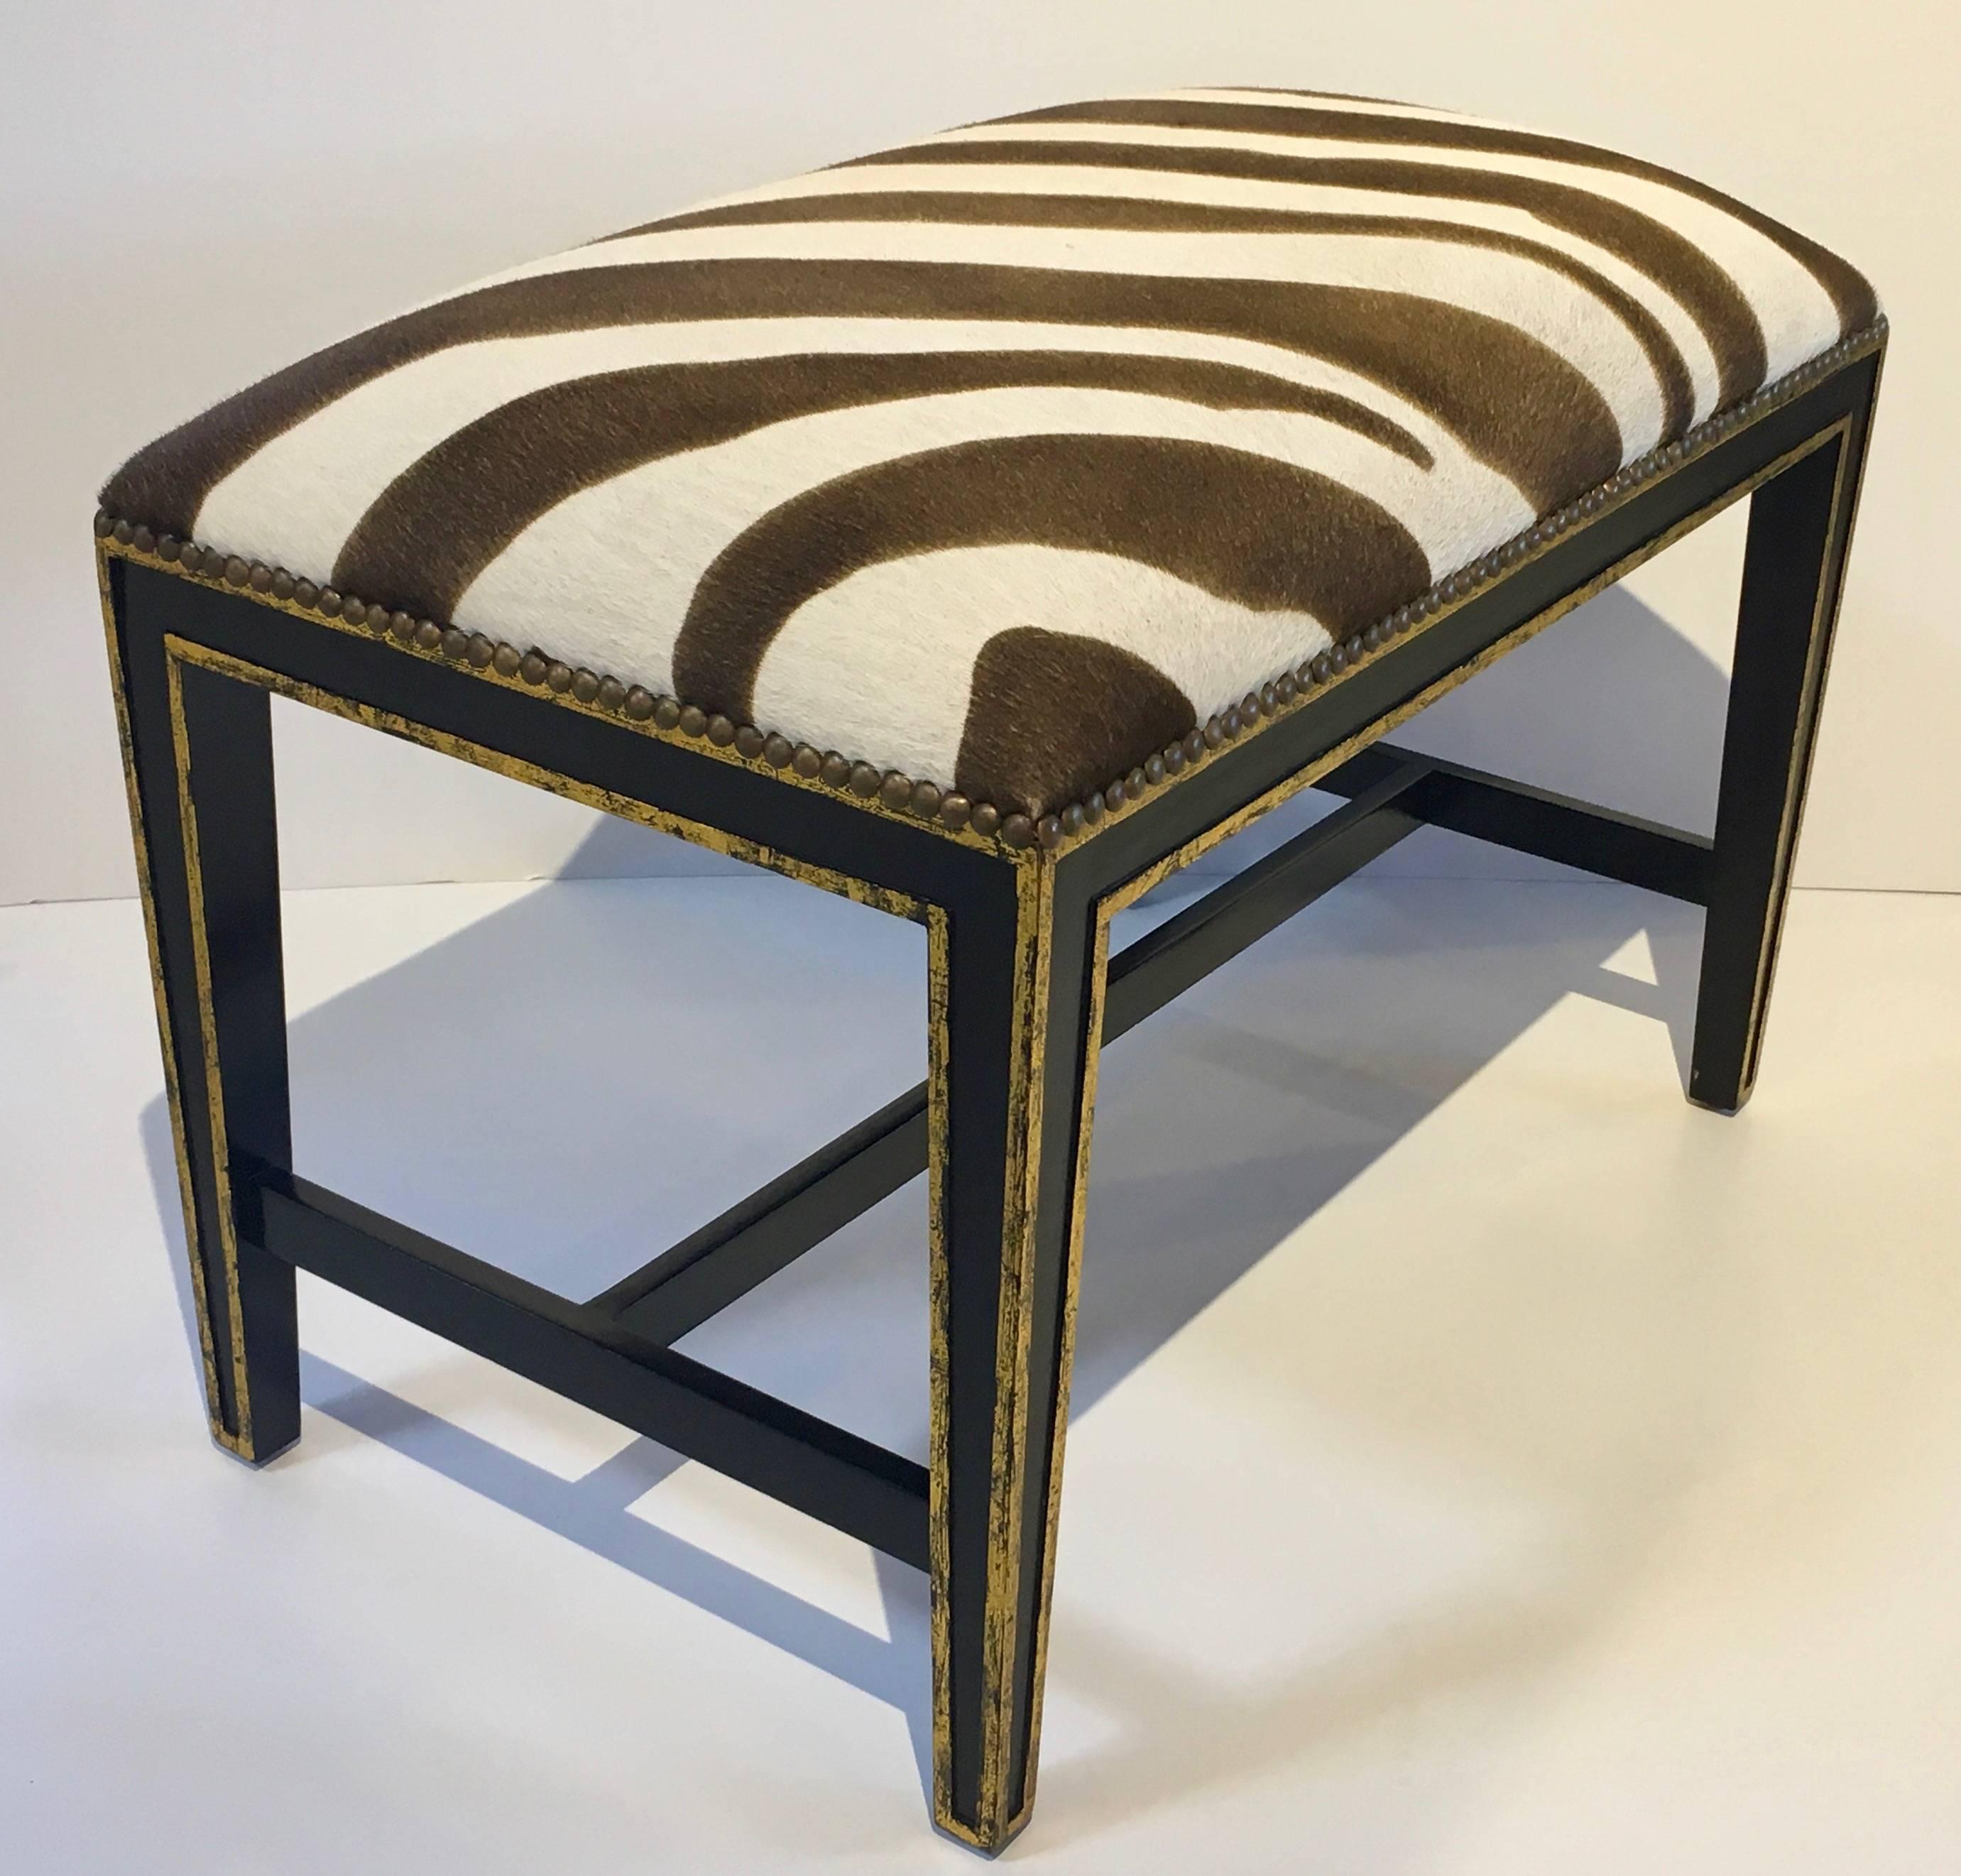 Super pair of zebra hide (pony hair) benches or ottomans with brass nailahead detailing. Sturdy wooden black frames with gilt painted detail and finished with a brass nailhead trim. Size is appropriate for under a console or used as a pair of